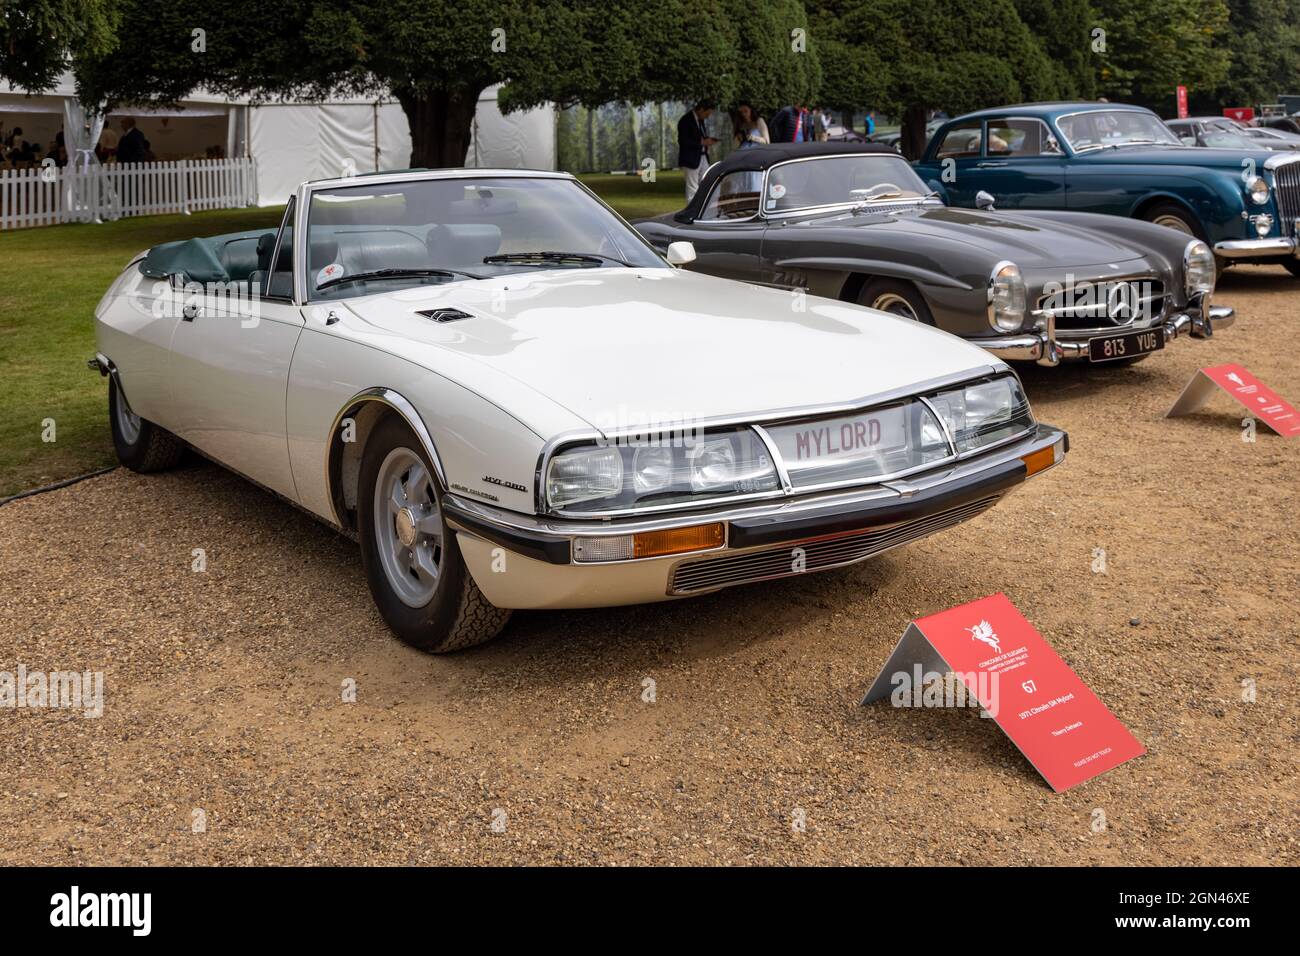 1971 Cylord, Concours of Elegance 2021, Hampton Court Palace, London, Großbritannien Stockfoto